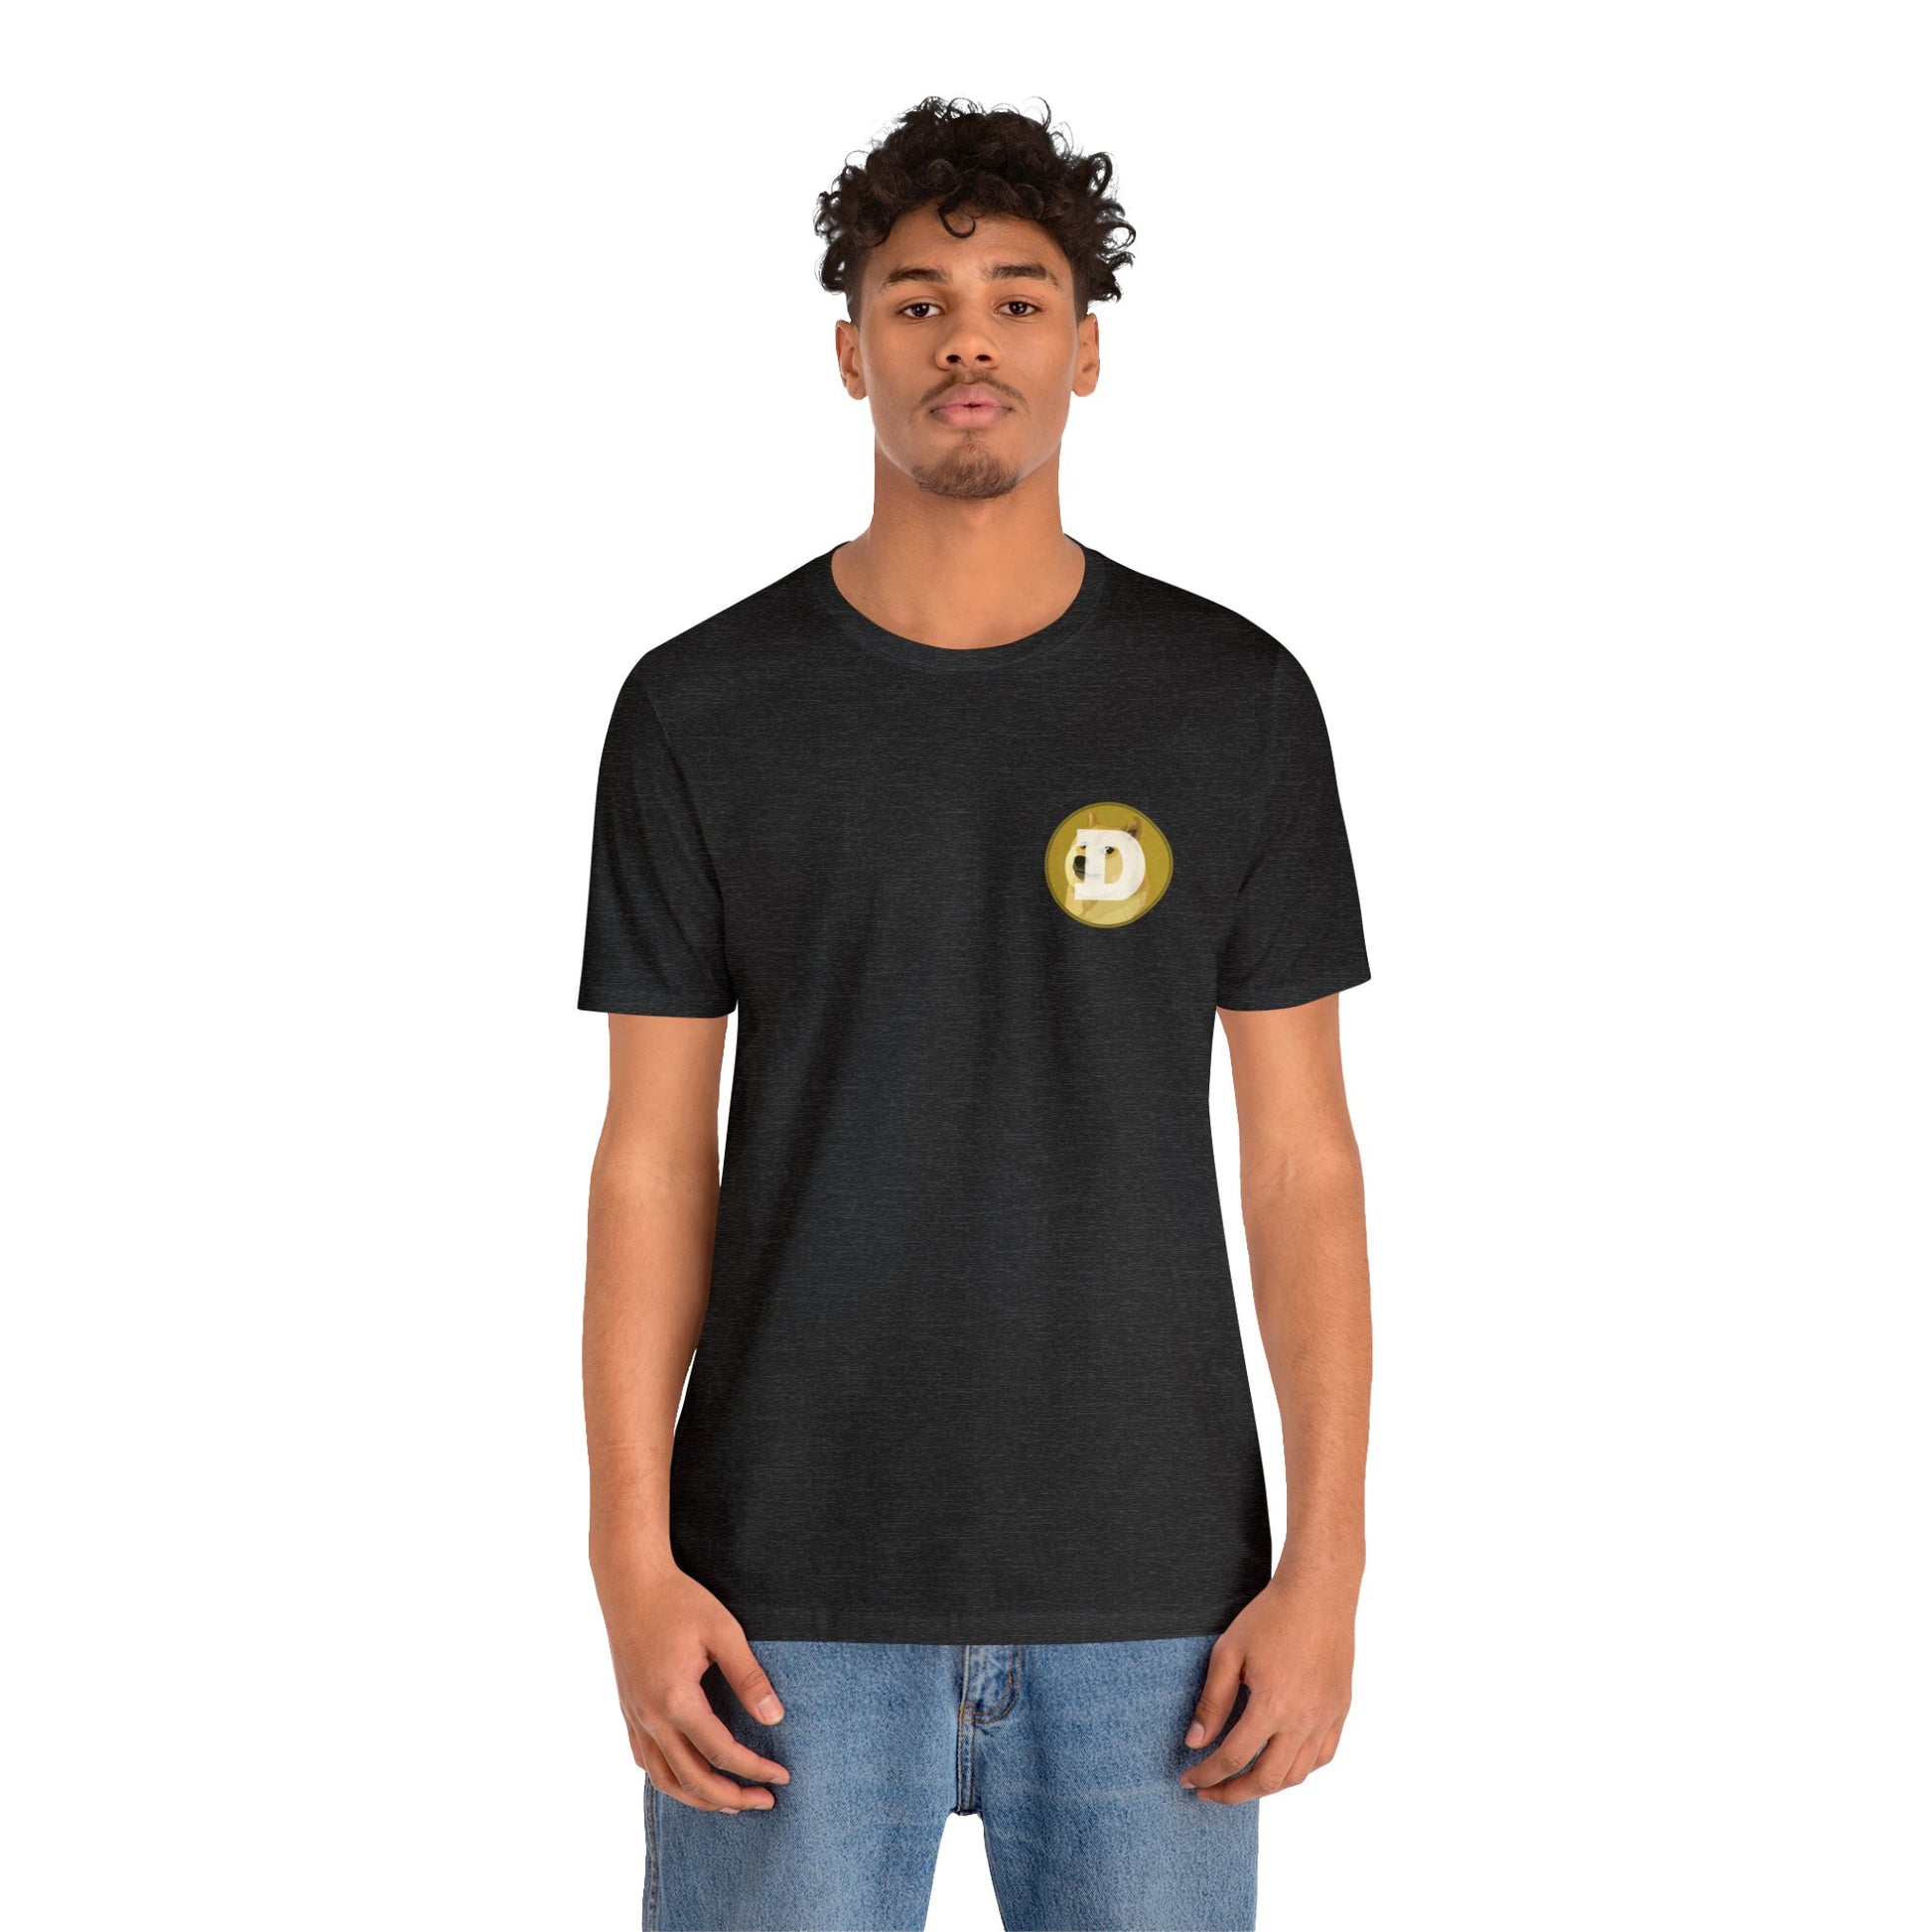 Original Dogecoin Logo With D Inside In Small T-Shirt